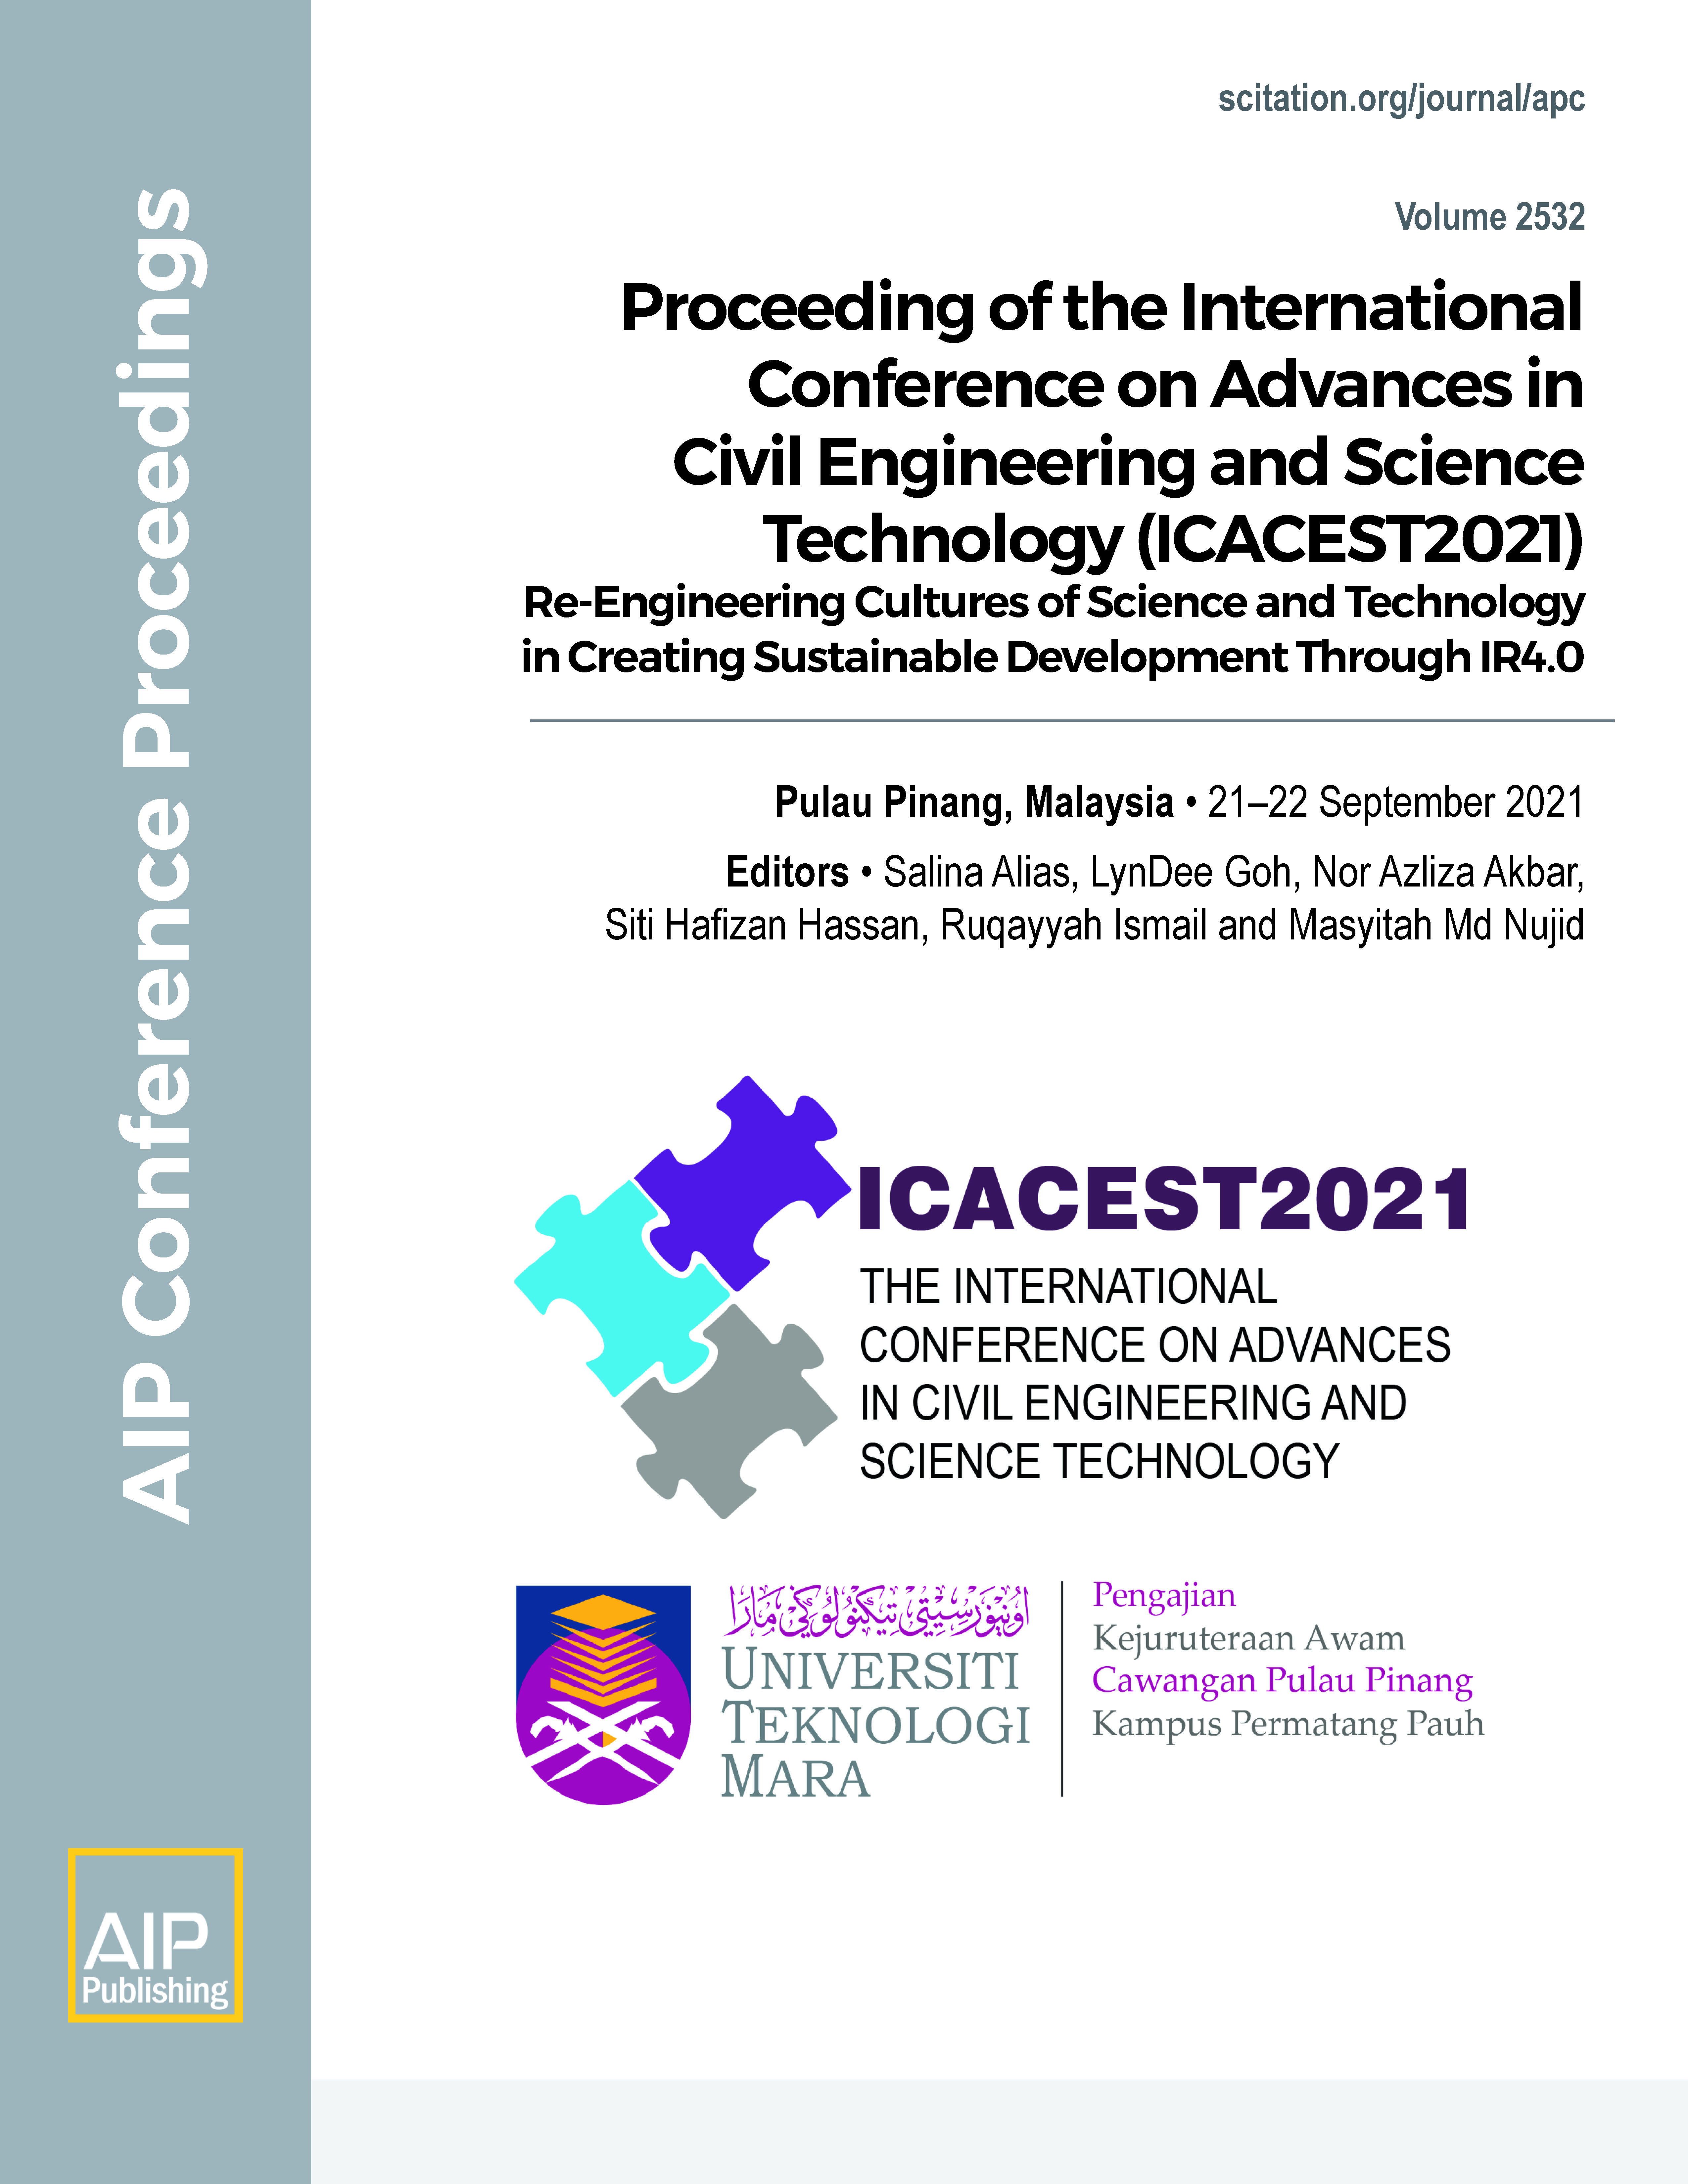 Volume 2532: Proceeding of the International Conference on